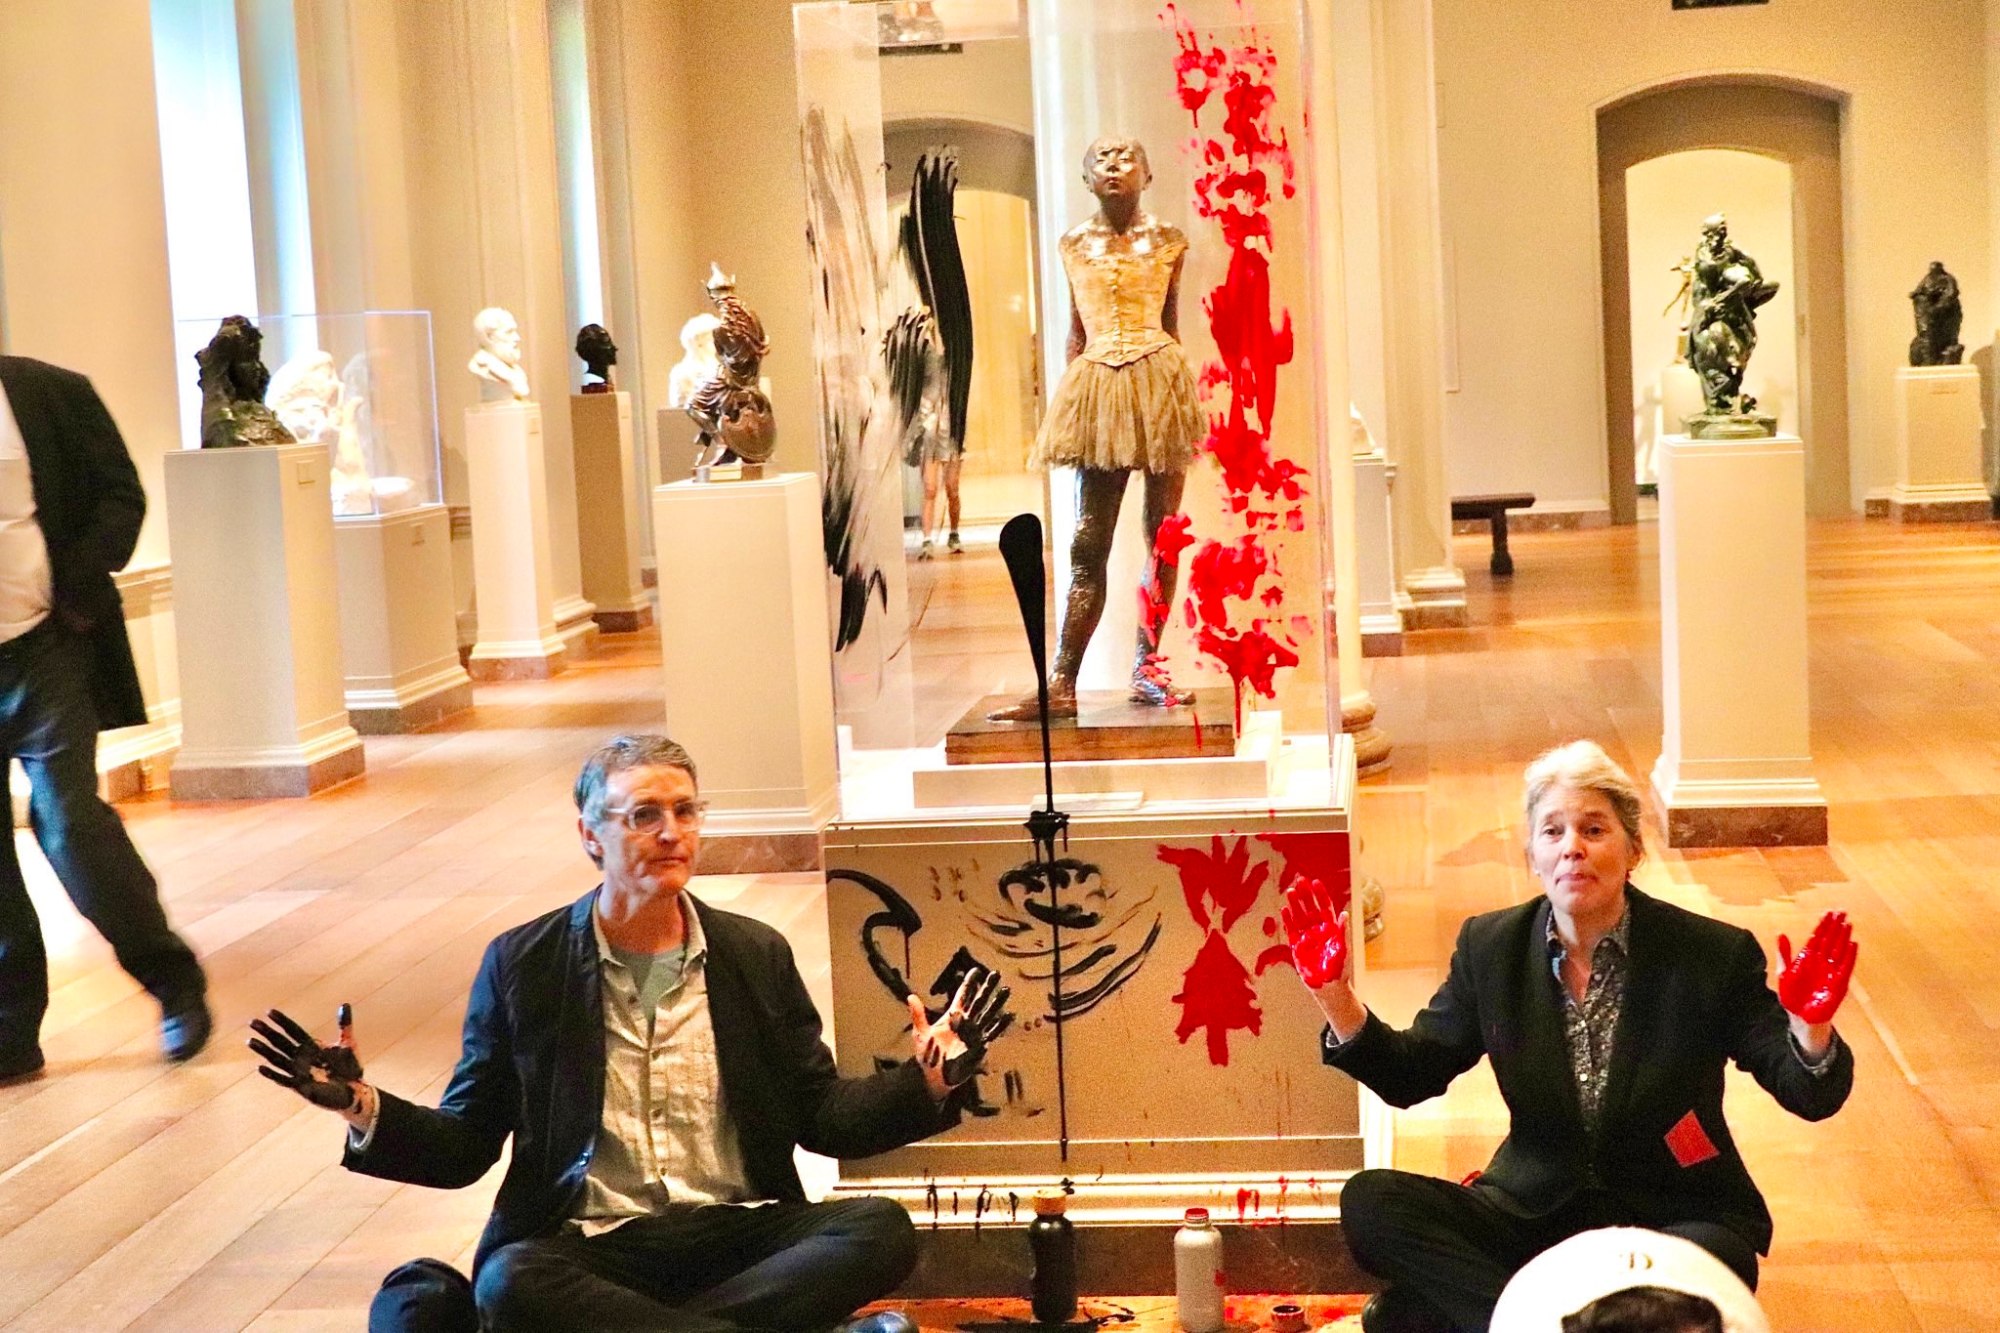 Two climate protesters from the group Declare Emergency are sitting down cross-legged next to the case and pedestal of Degas's sculpture "Little Dancer Aged Fourteen" at the National Gallery of Art after smearing black and red paint on it on April 27, 2023. The protestors' hands are covered in paint.